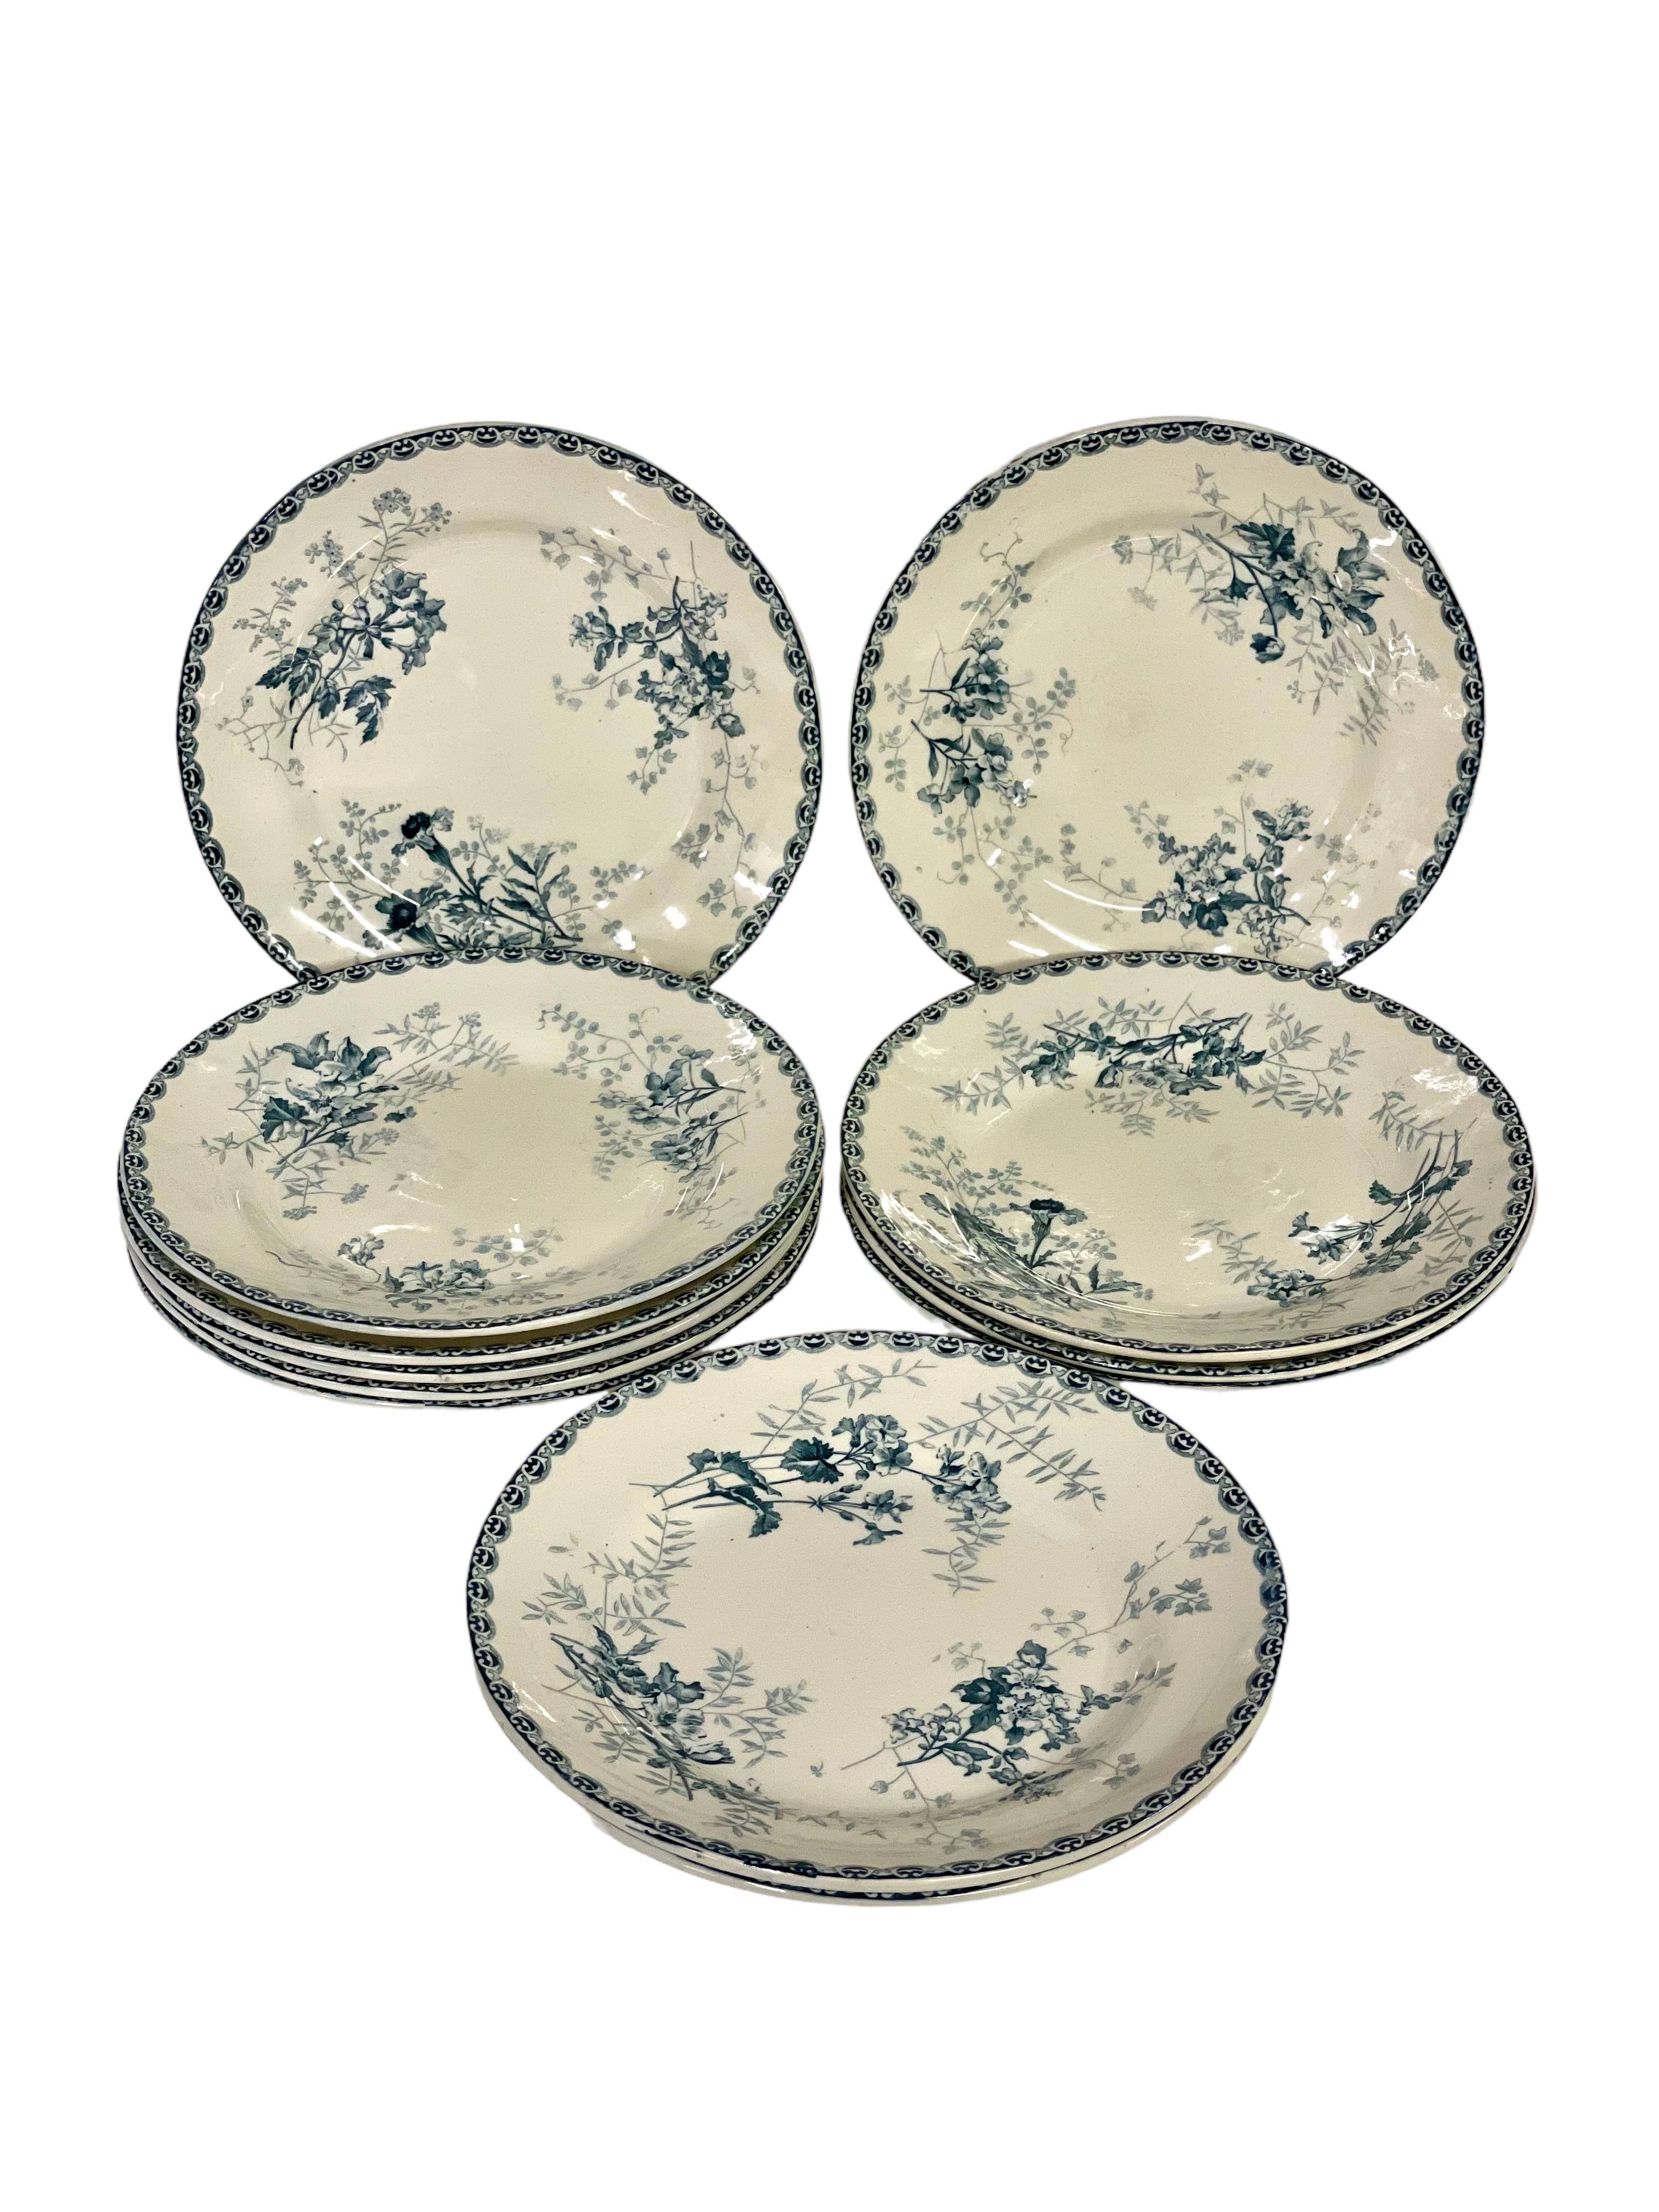 A gorgeous set of twelve antique French ironstone ('Terre de Fer') dinner plates, featuring a wonderful hand-painted transferware decor of blue and white wildflowers. In very good, vintage condition for their age, with no cracking and little to no